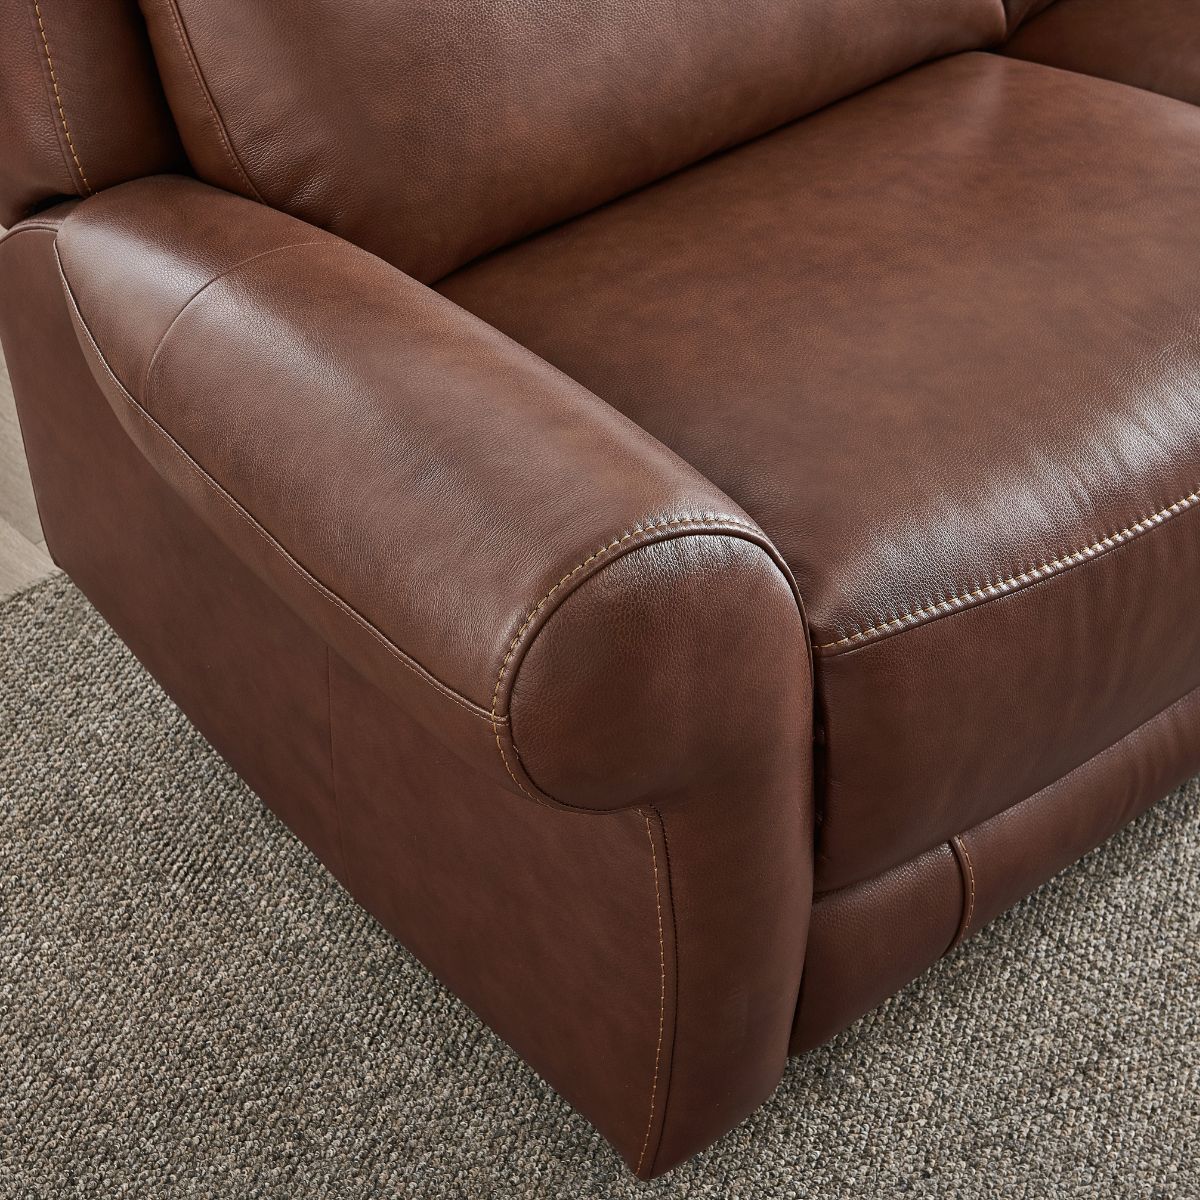 Lindfield Tan Leather 2 Seater Powered Recliner - 3